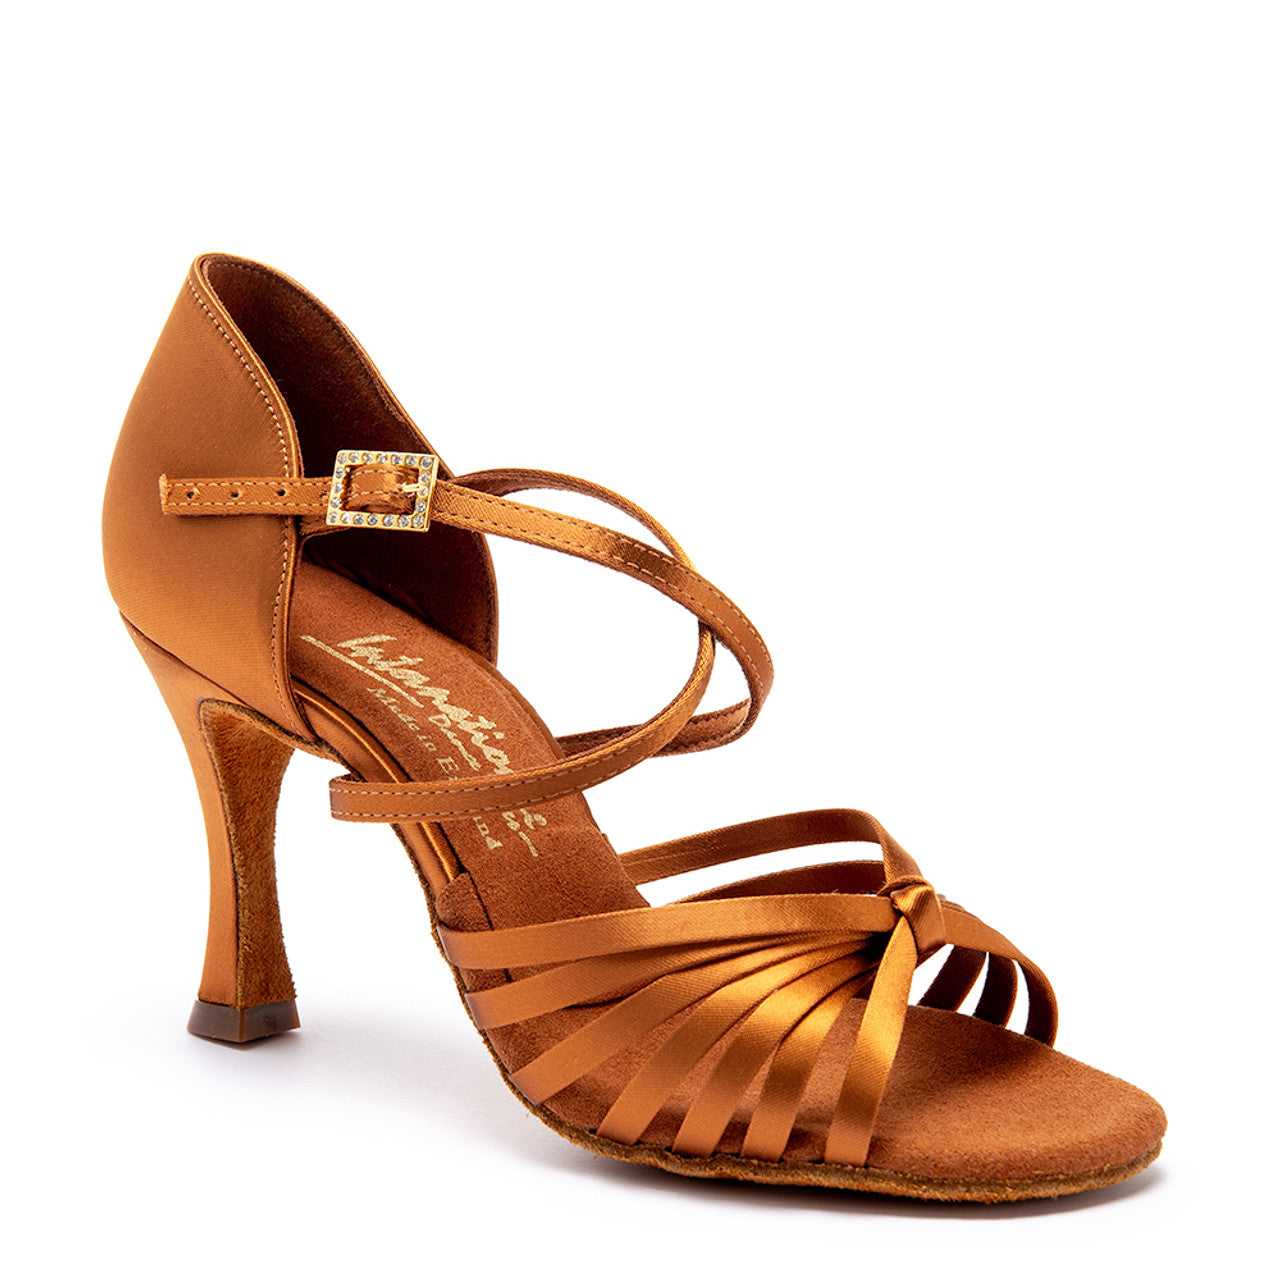 International Dance Shoes IDS Ladies Satin Latin Dance Shoe with Knot on Vamp.  Available in Multiple Colors and Heel options FIORELLA